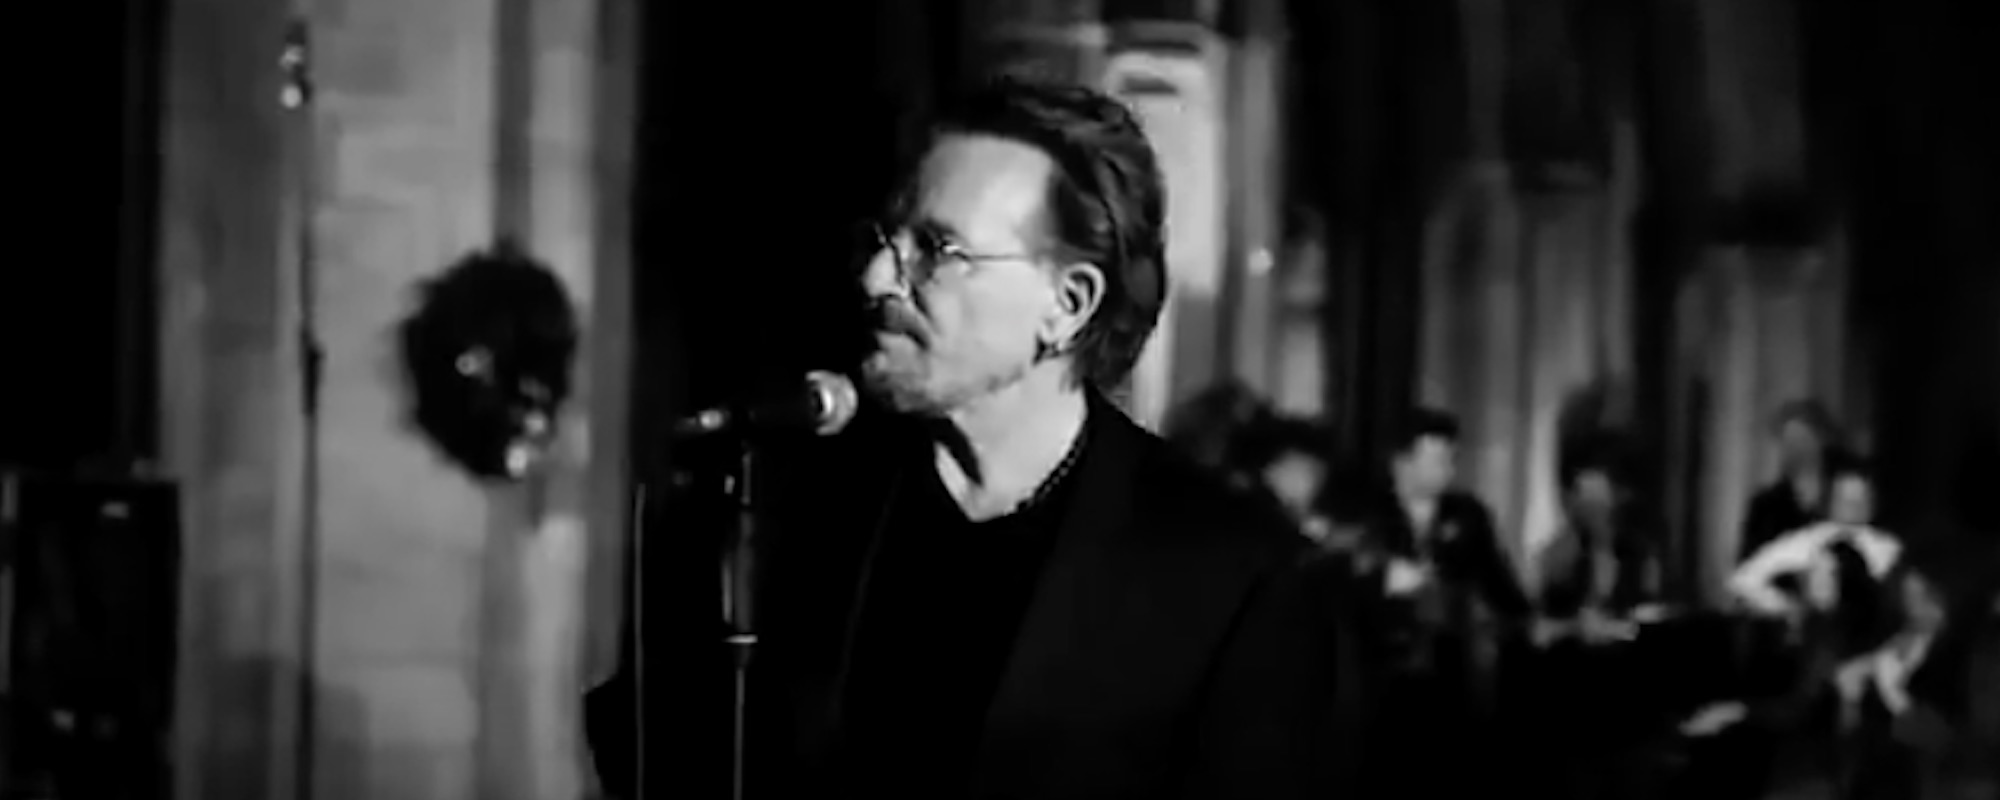 Bono: “I’m Just So Embarrassed” About Old U2 Songs